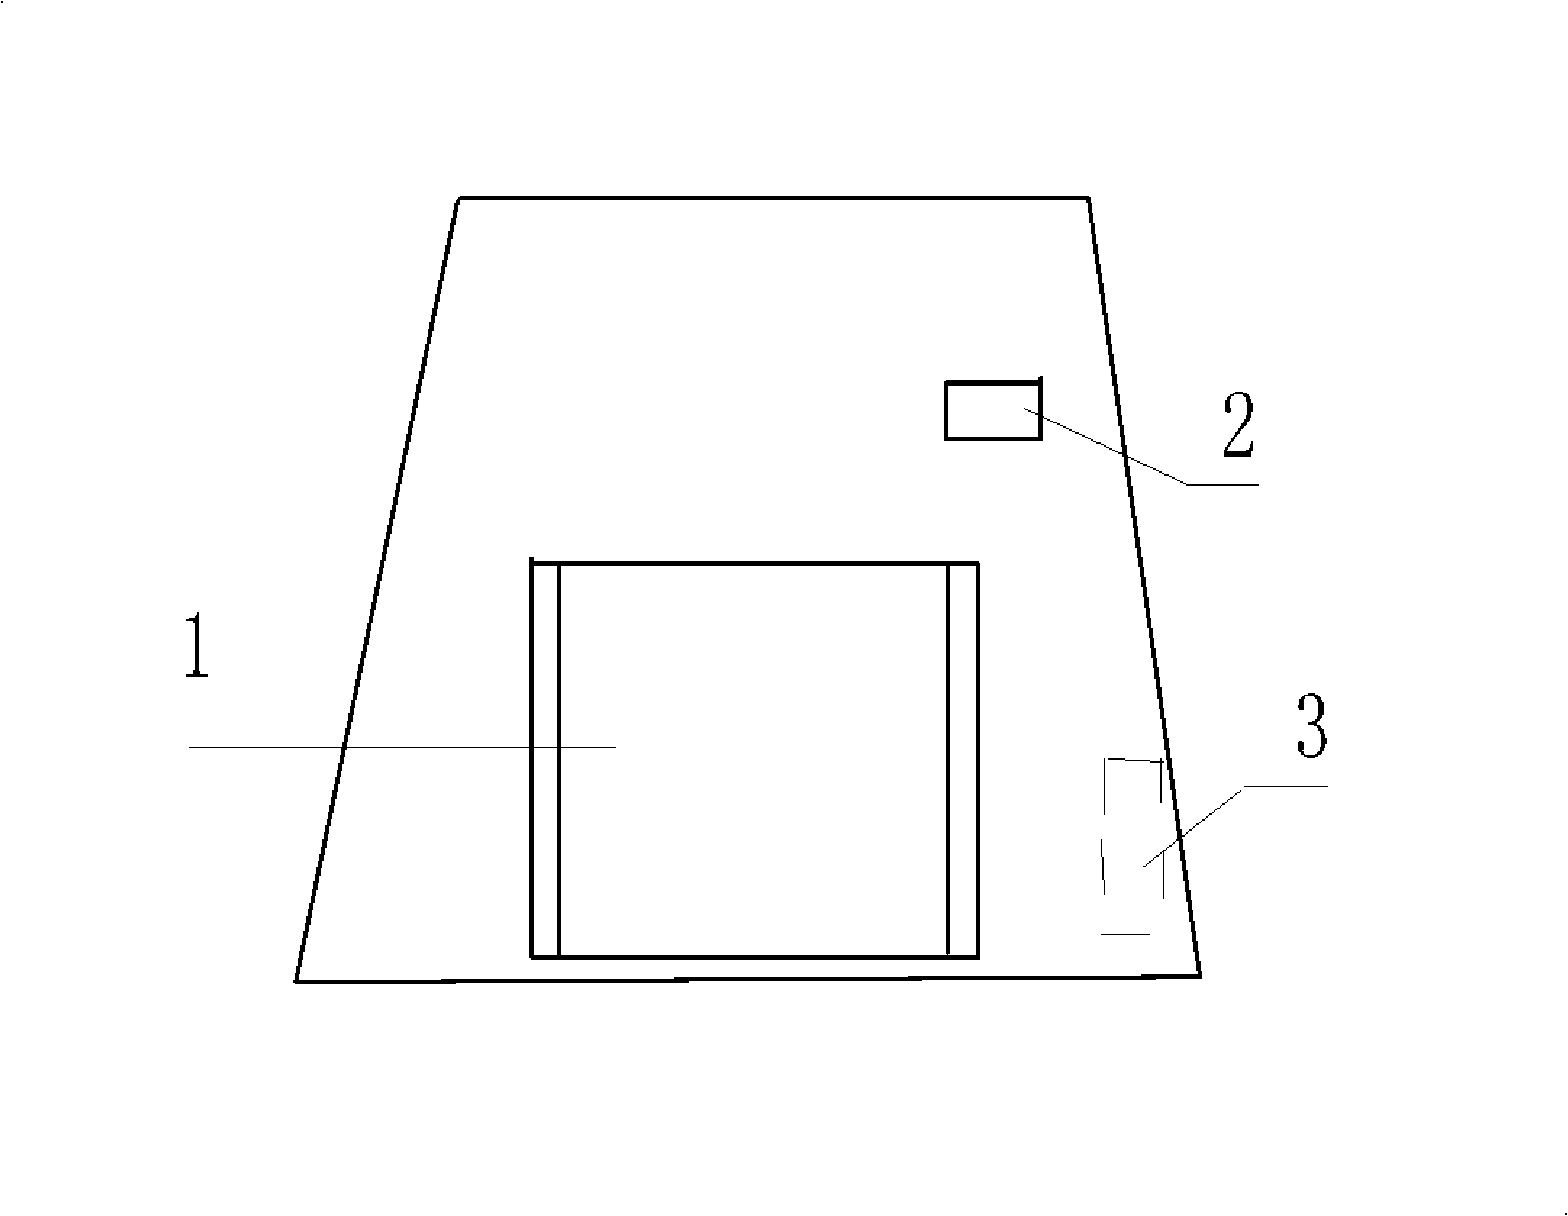 Automatic teller machine method and apparatus for self-help bicycle